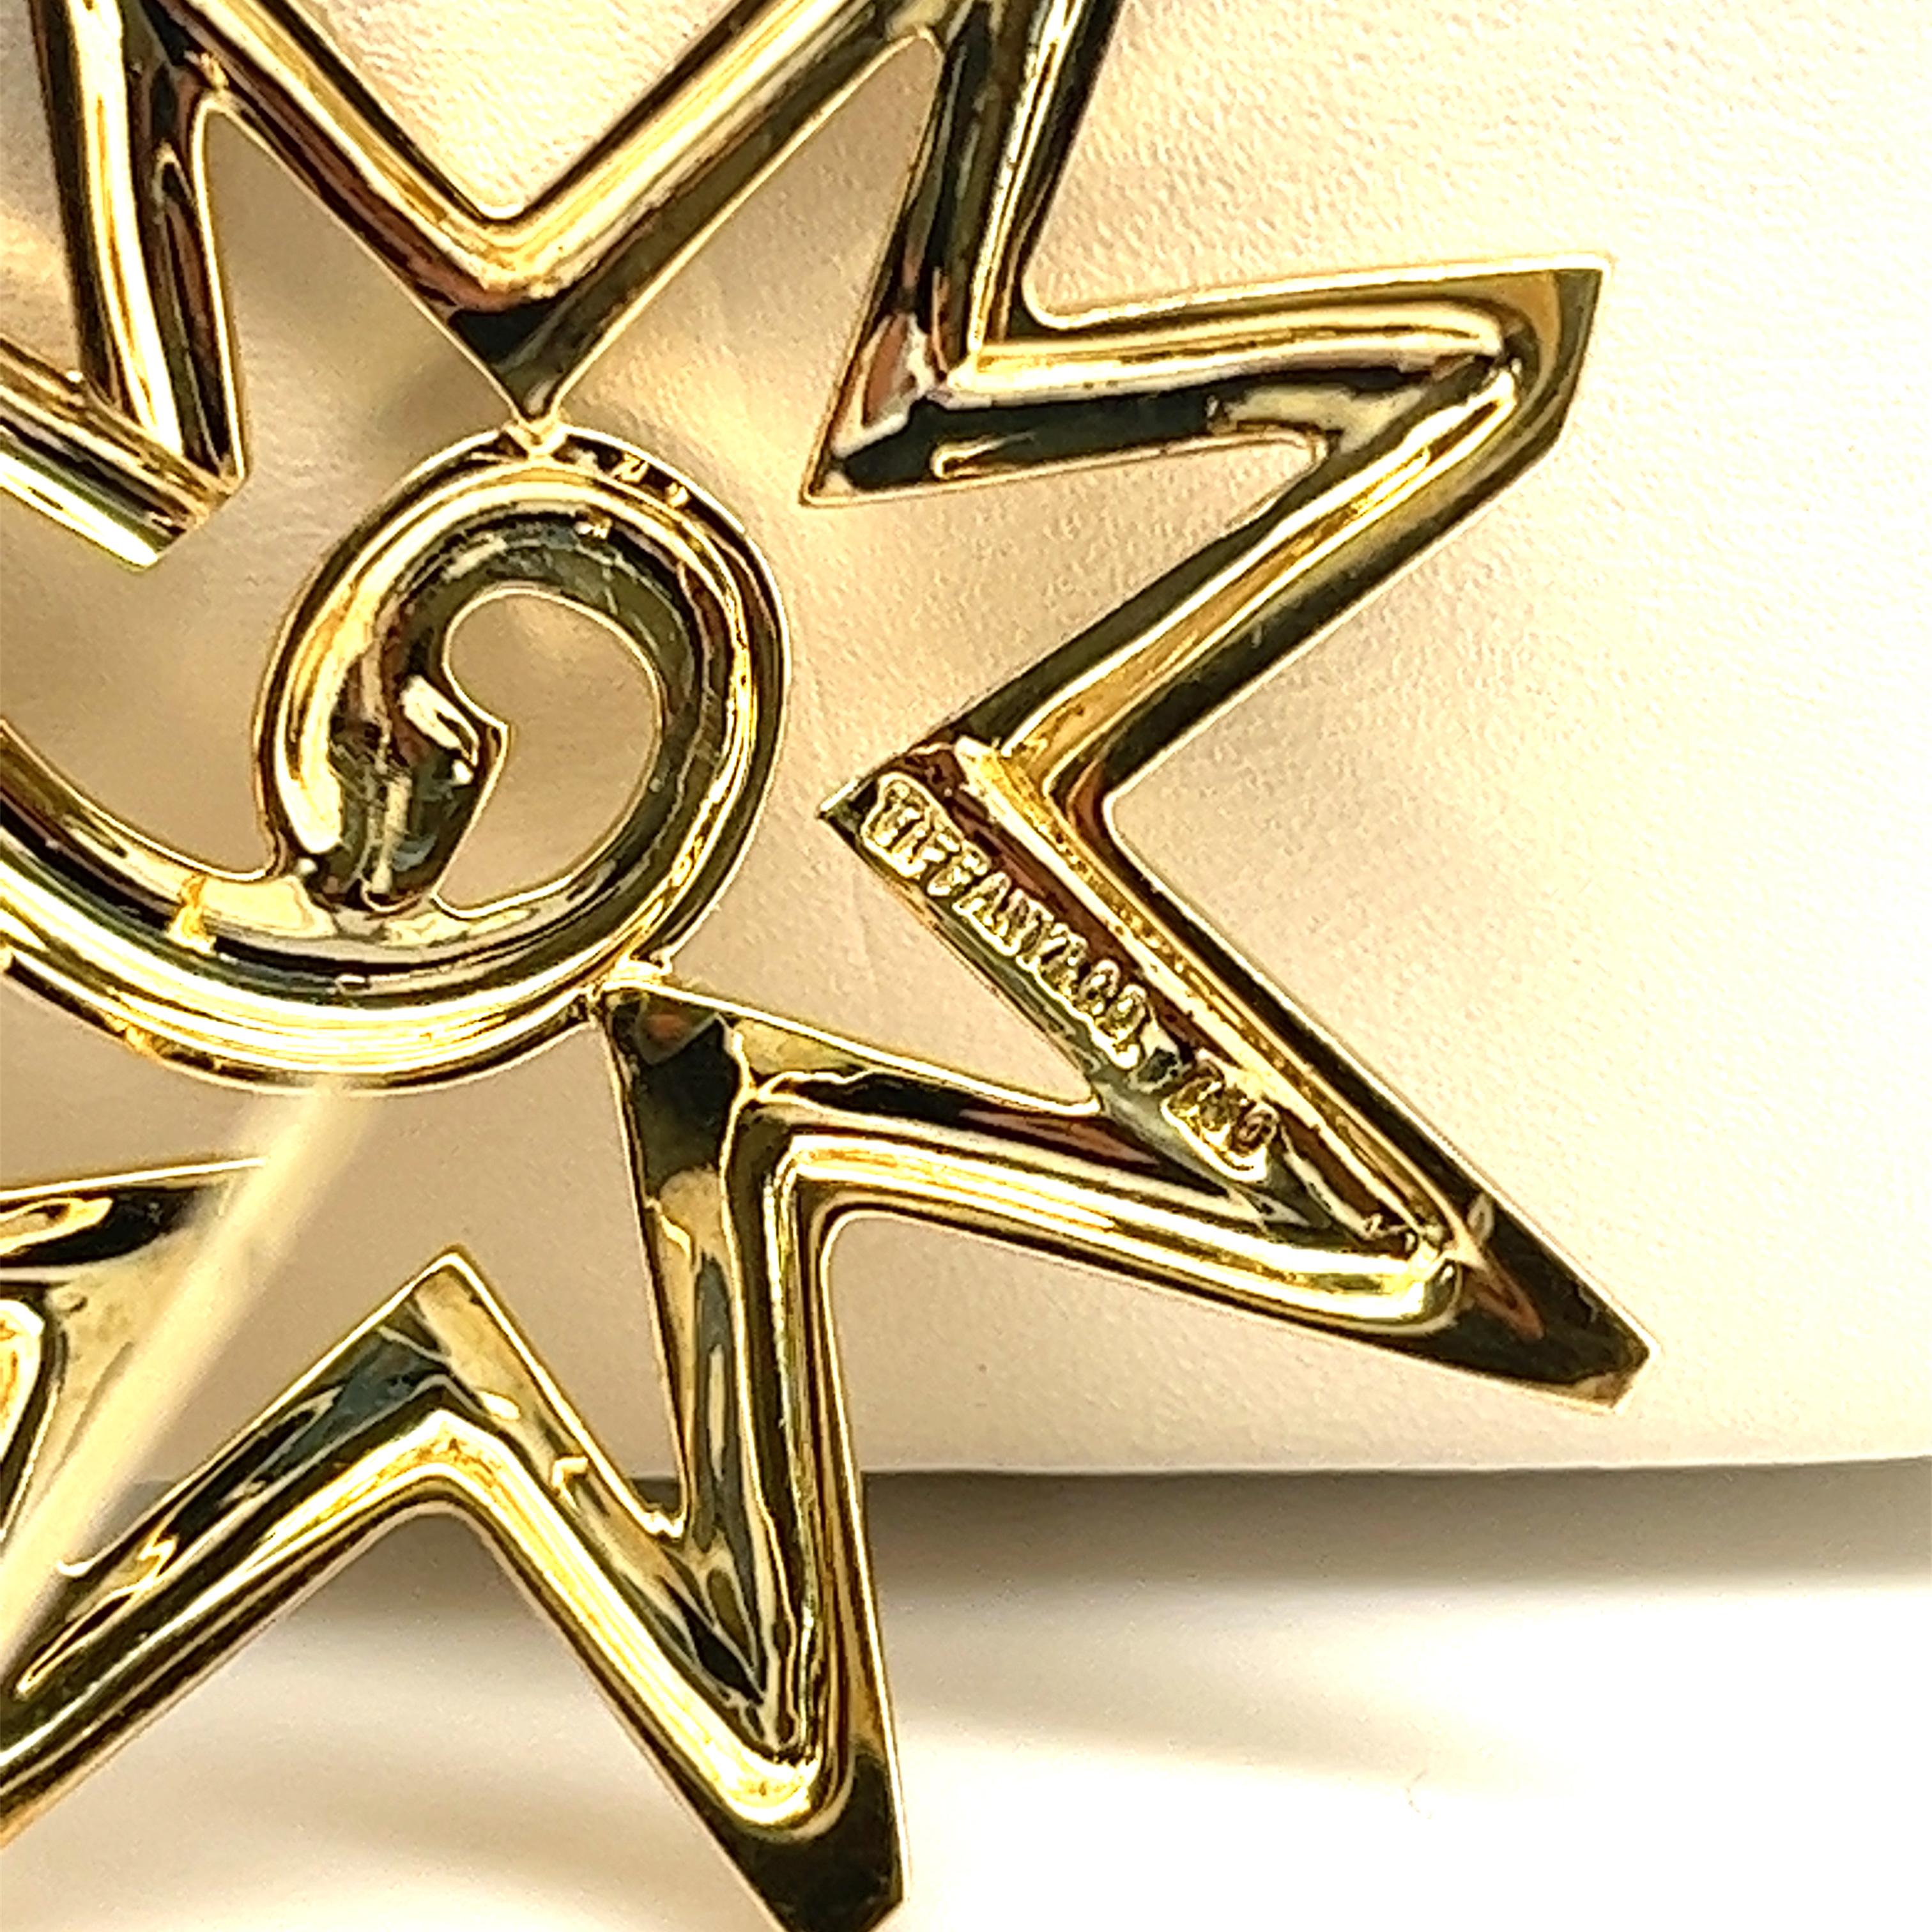 Paloma Picasso, for Tiffany & Co. geometric star motif pin brooch in 18k solid yellow gold. 

Stamped: '750' - 'Paloma Picasso' - 'Tiffany & Co.' 

✔ Metal: 18K Yellow Gold
✔ Weight: 11.8g
✔ Measurements: 42mm x 38mm

Condition: Minor cosmetic marks